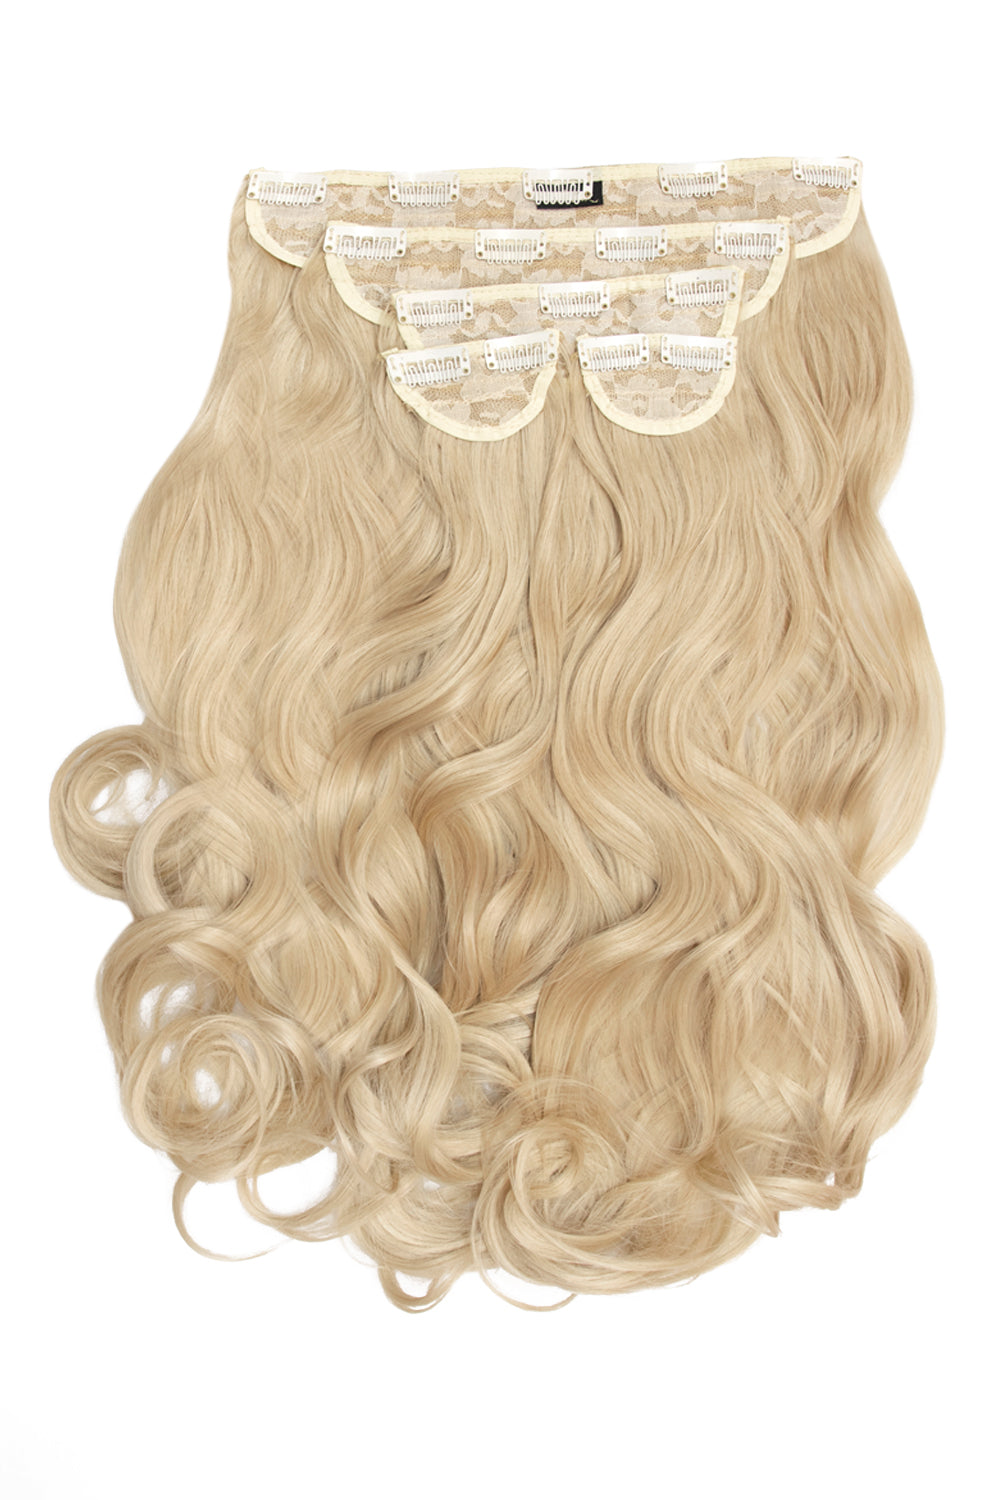 Super Thick 22" 5 Piece Curly Clip Hair Extensions + Hair Care Bundle - California Blonde